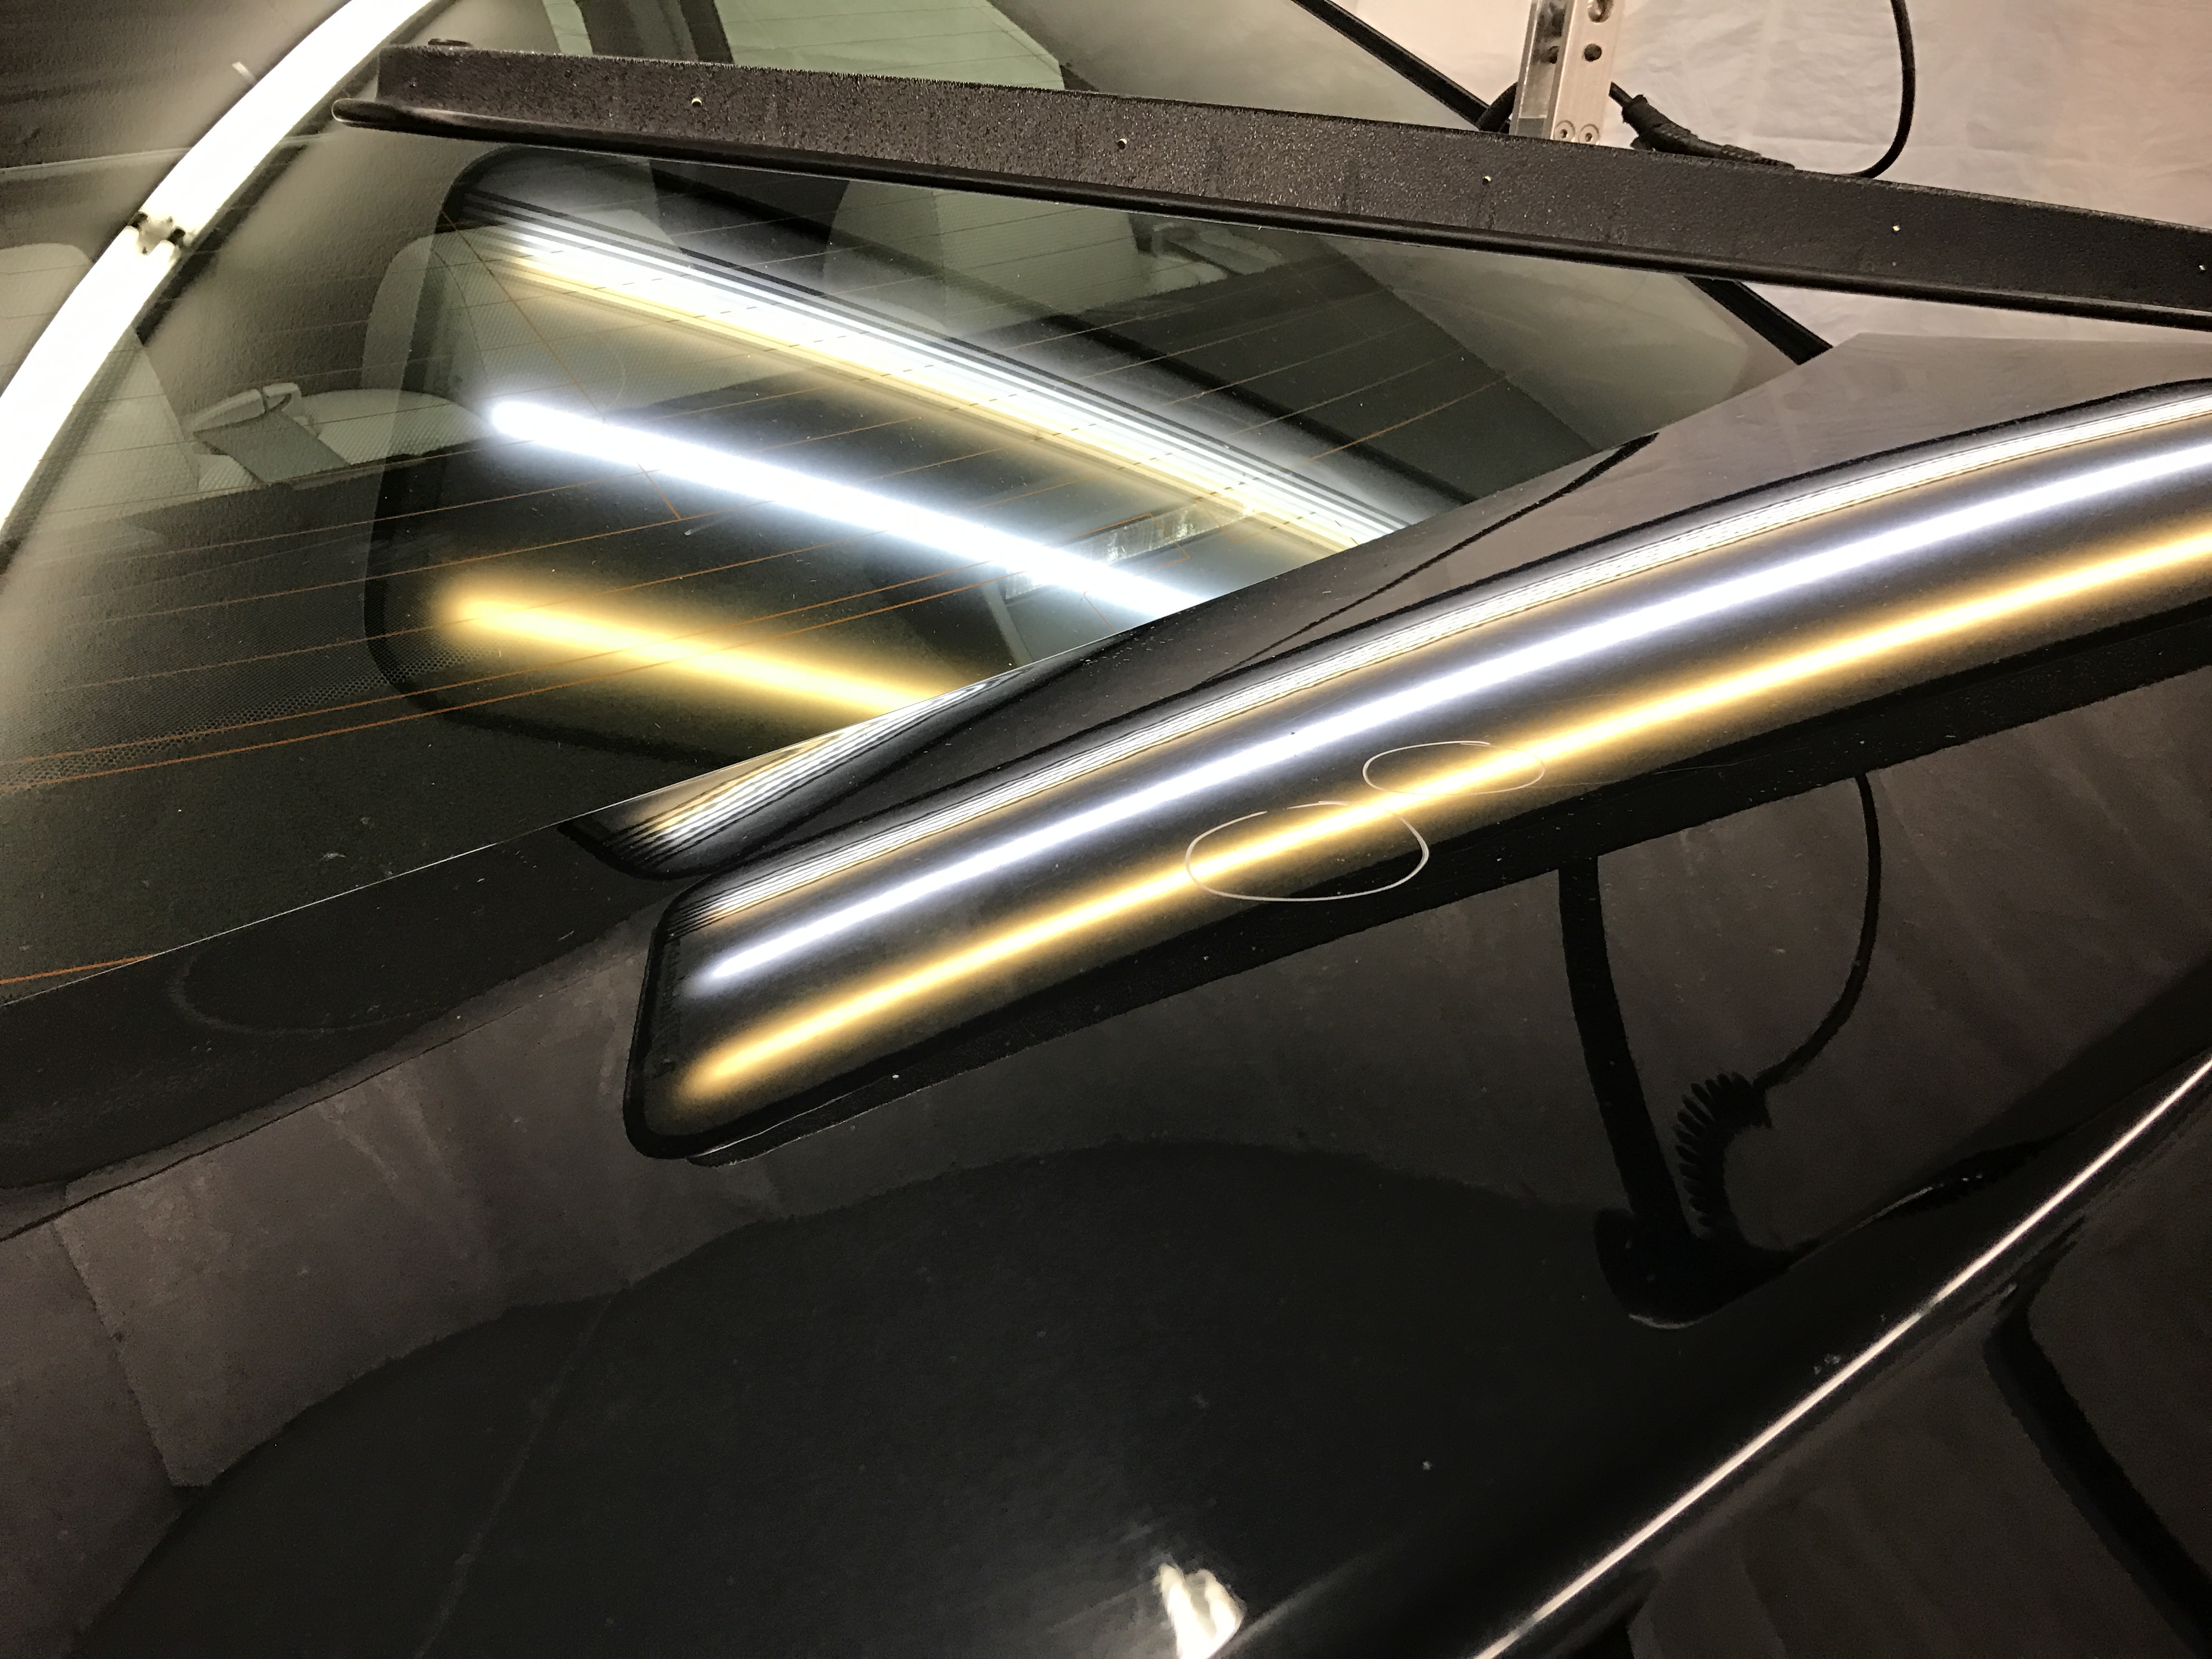 2011 Toyota Camry, after the dent removal process, under the inspection lights, http://217dent.com Springfield, IL